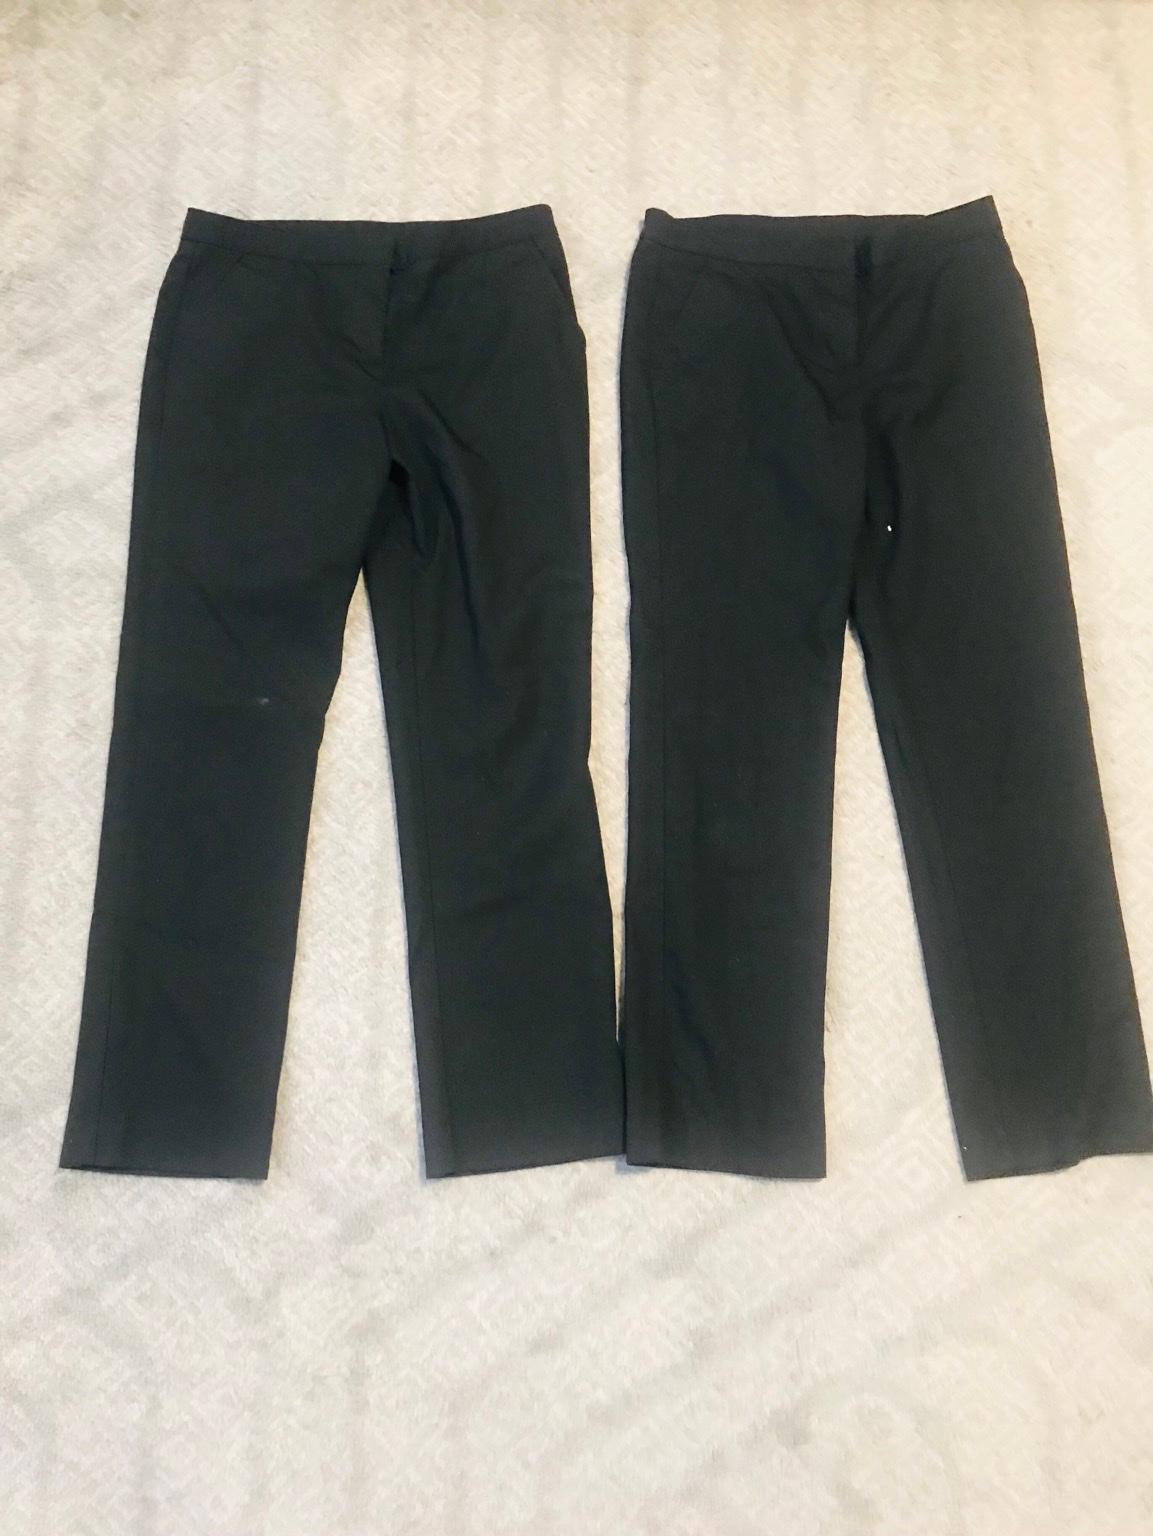 b'SCHOOL TROUSERS/ LADIES WORK TROUSERS #1', used for sale  